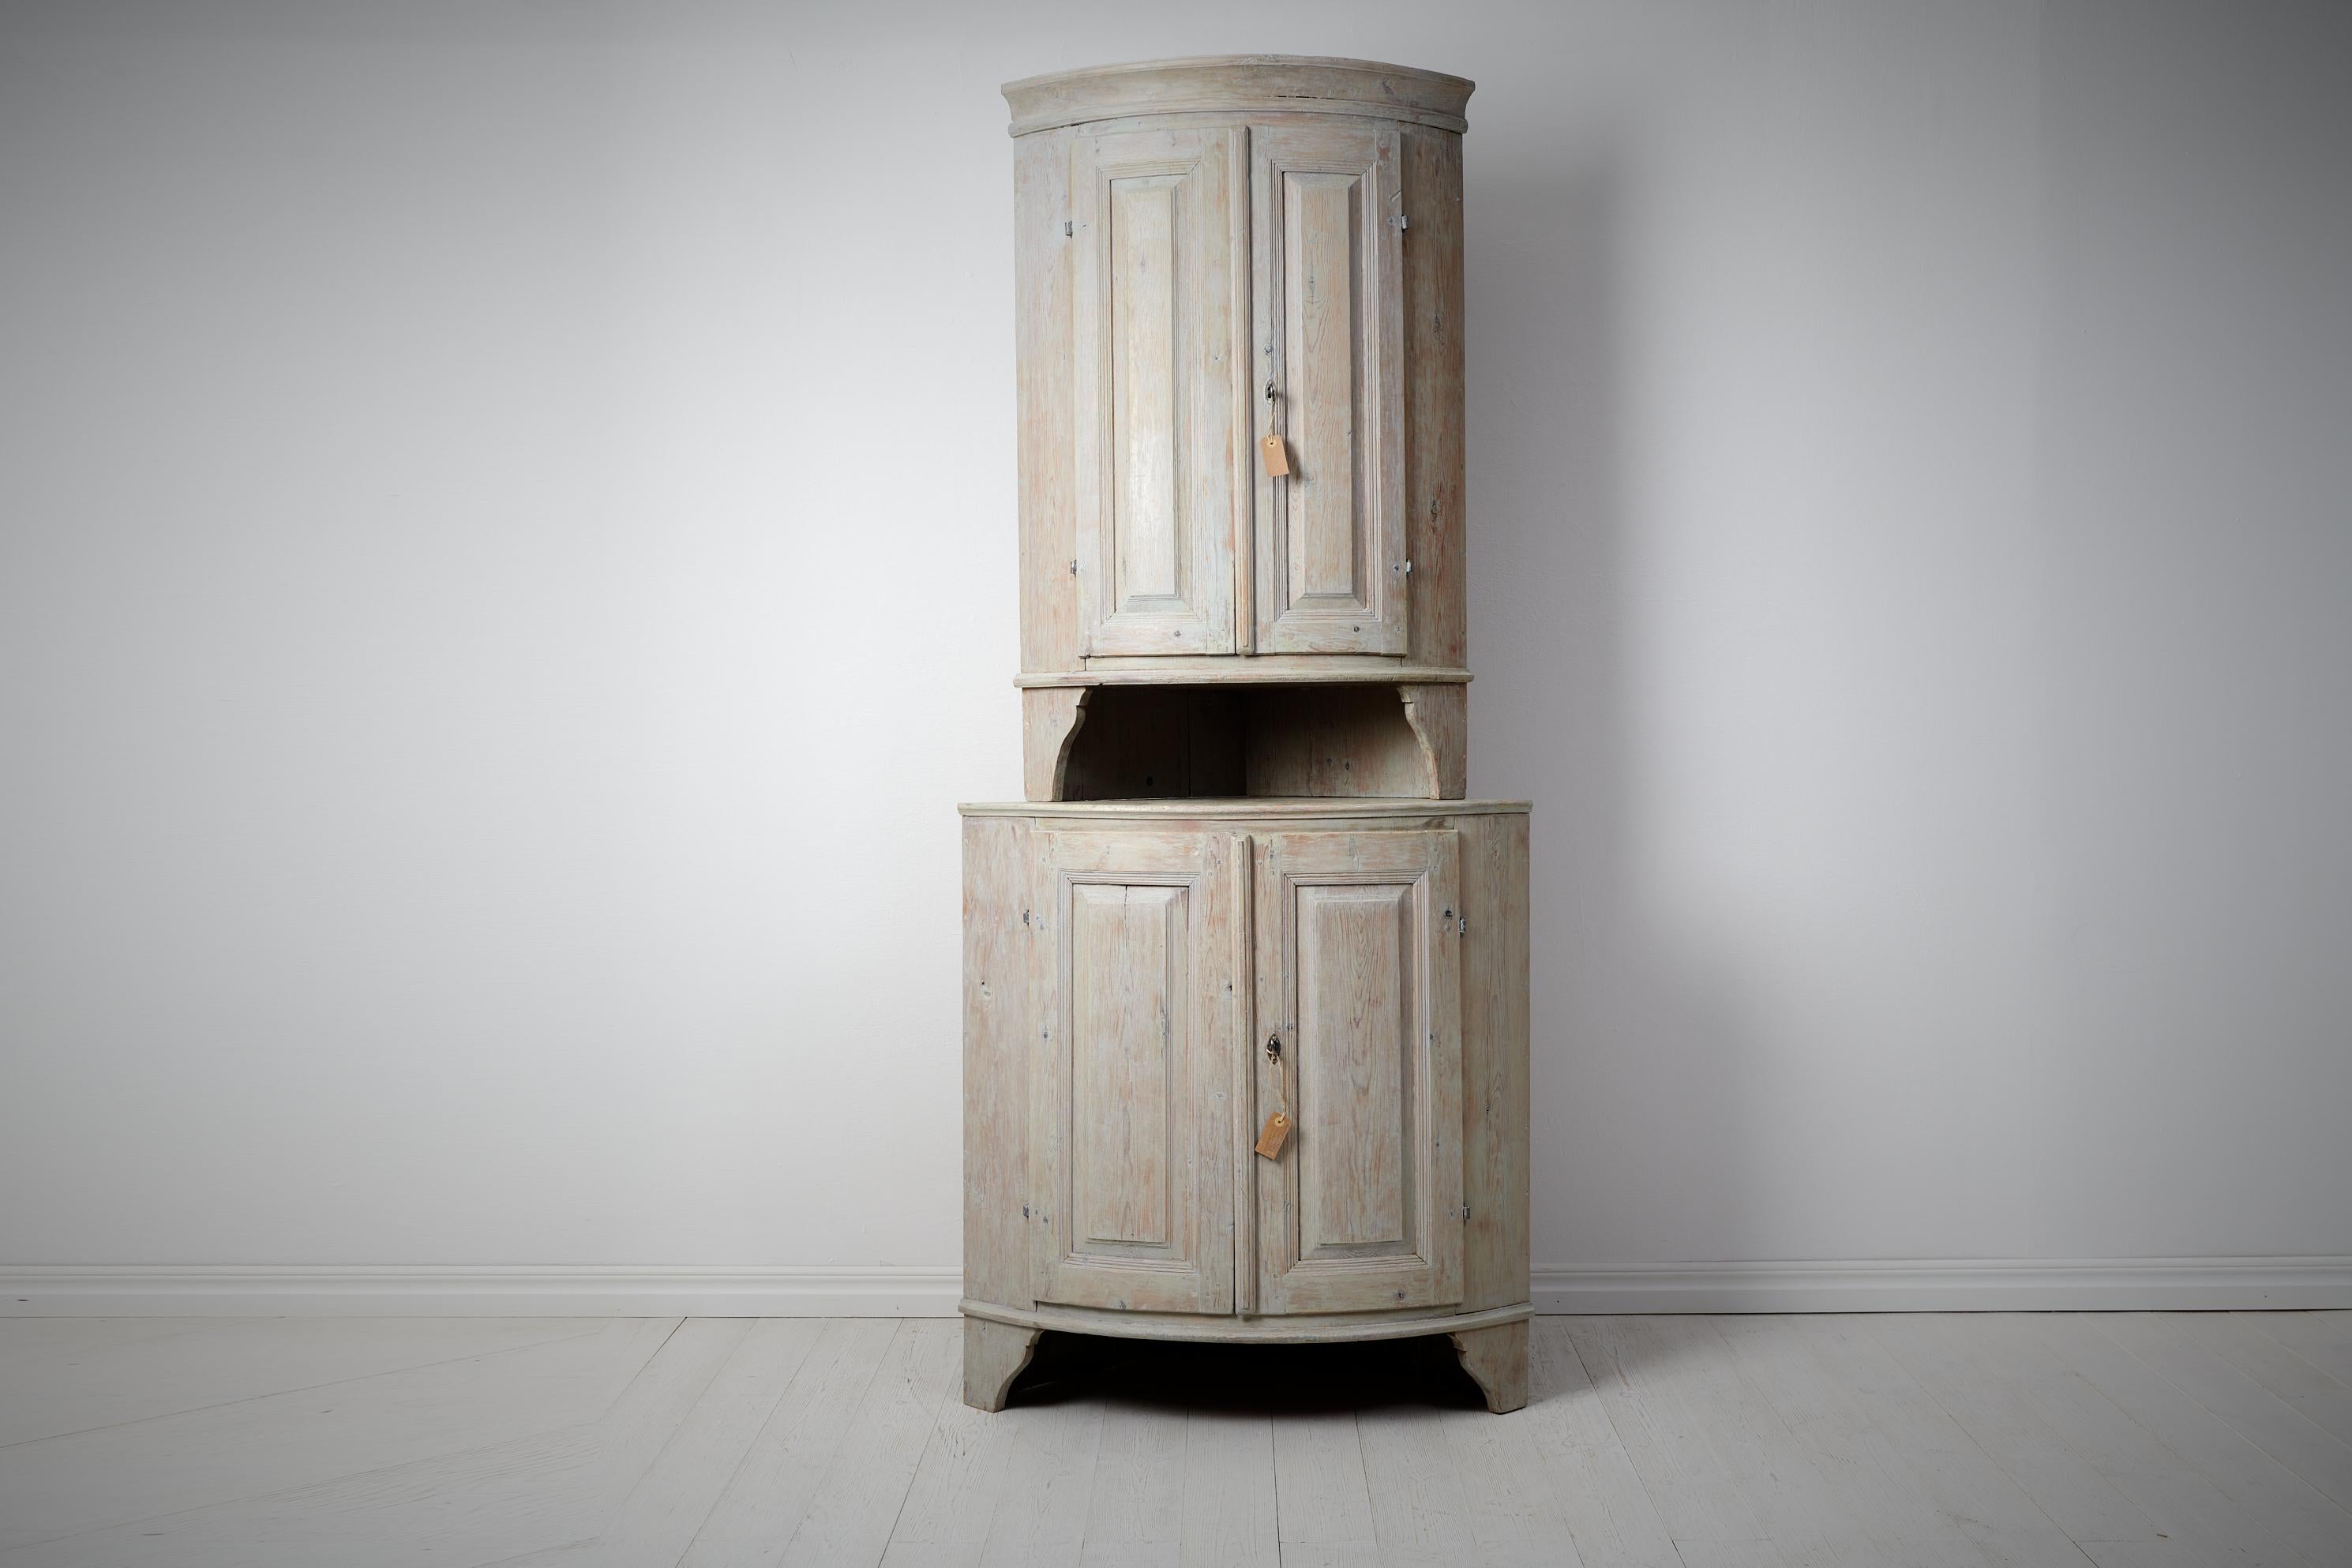 Antique gustavian corner cabinet from northern Sweden made during the last years of the 18th century, around 1790. The cabinet is in two parts with the straight classic shape made in painted pine. The paint is light grey which is typical for Swedish